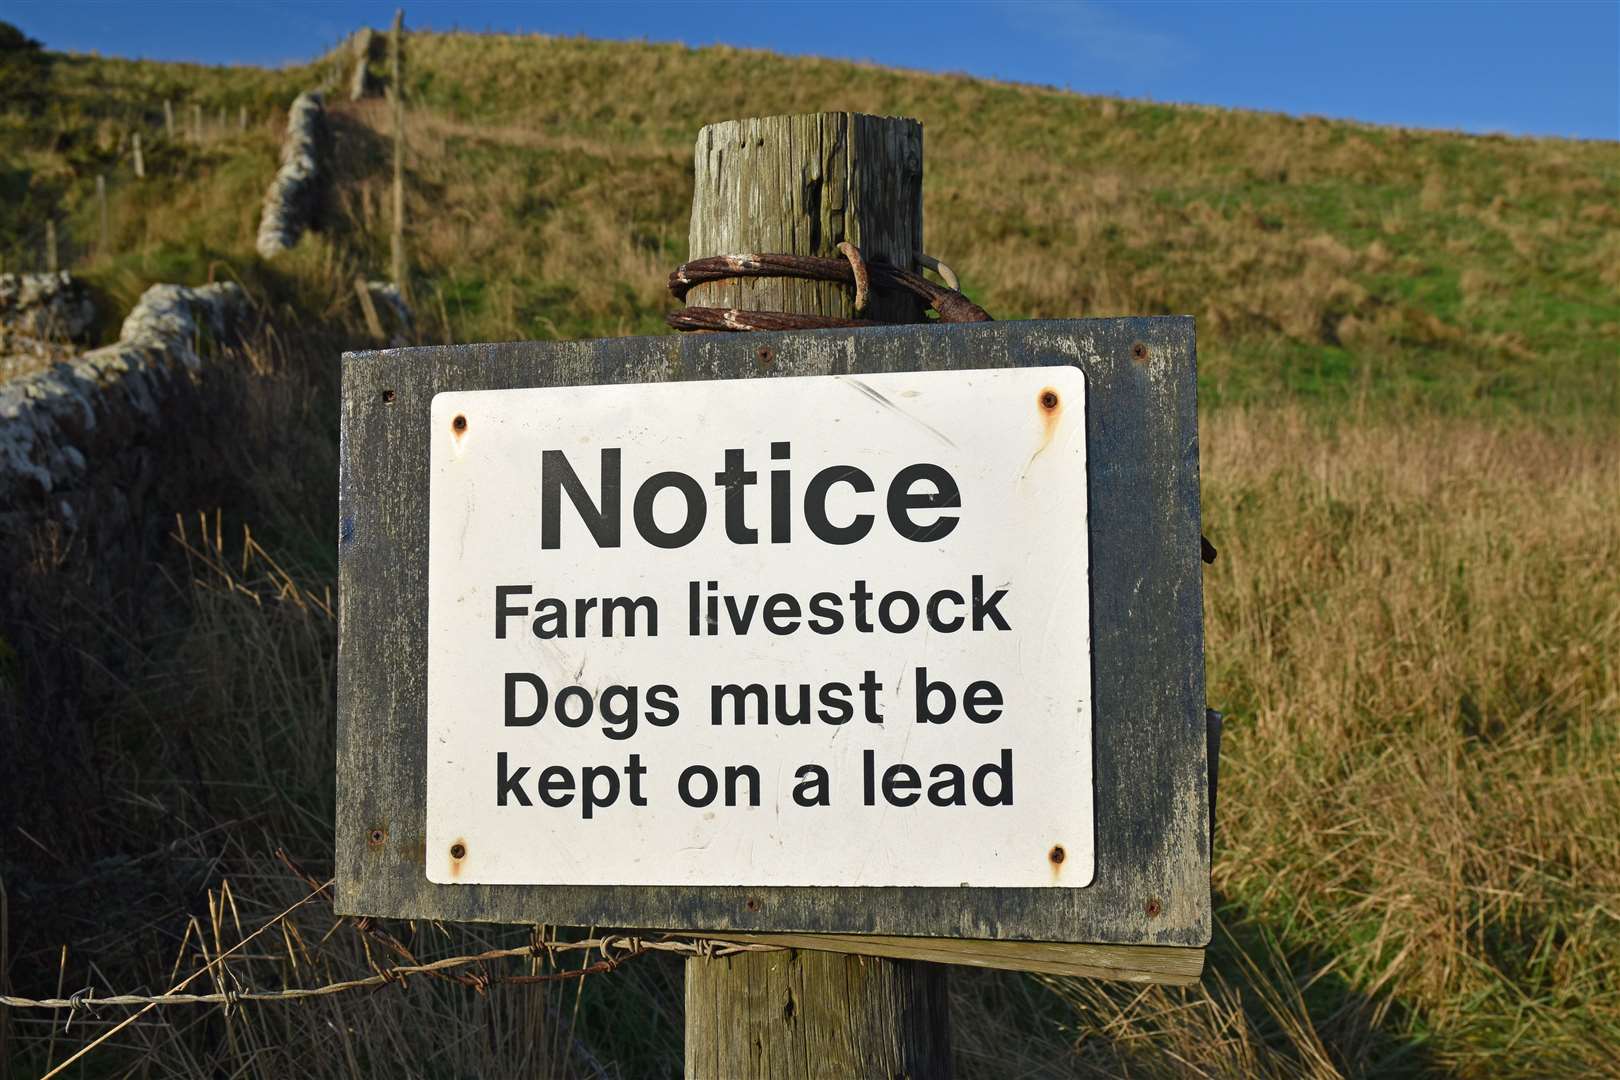 Dog walkers are being called upon to act responsibly.